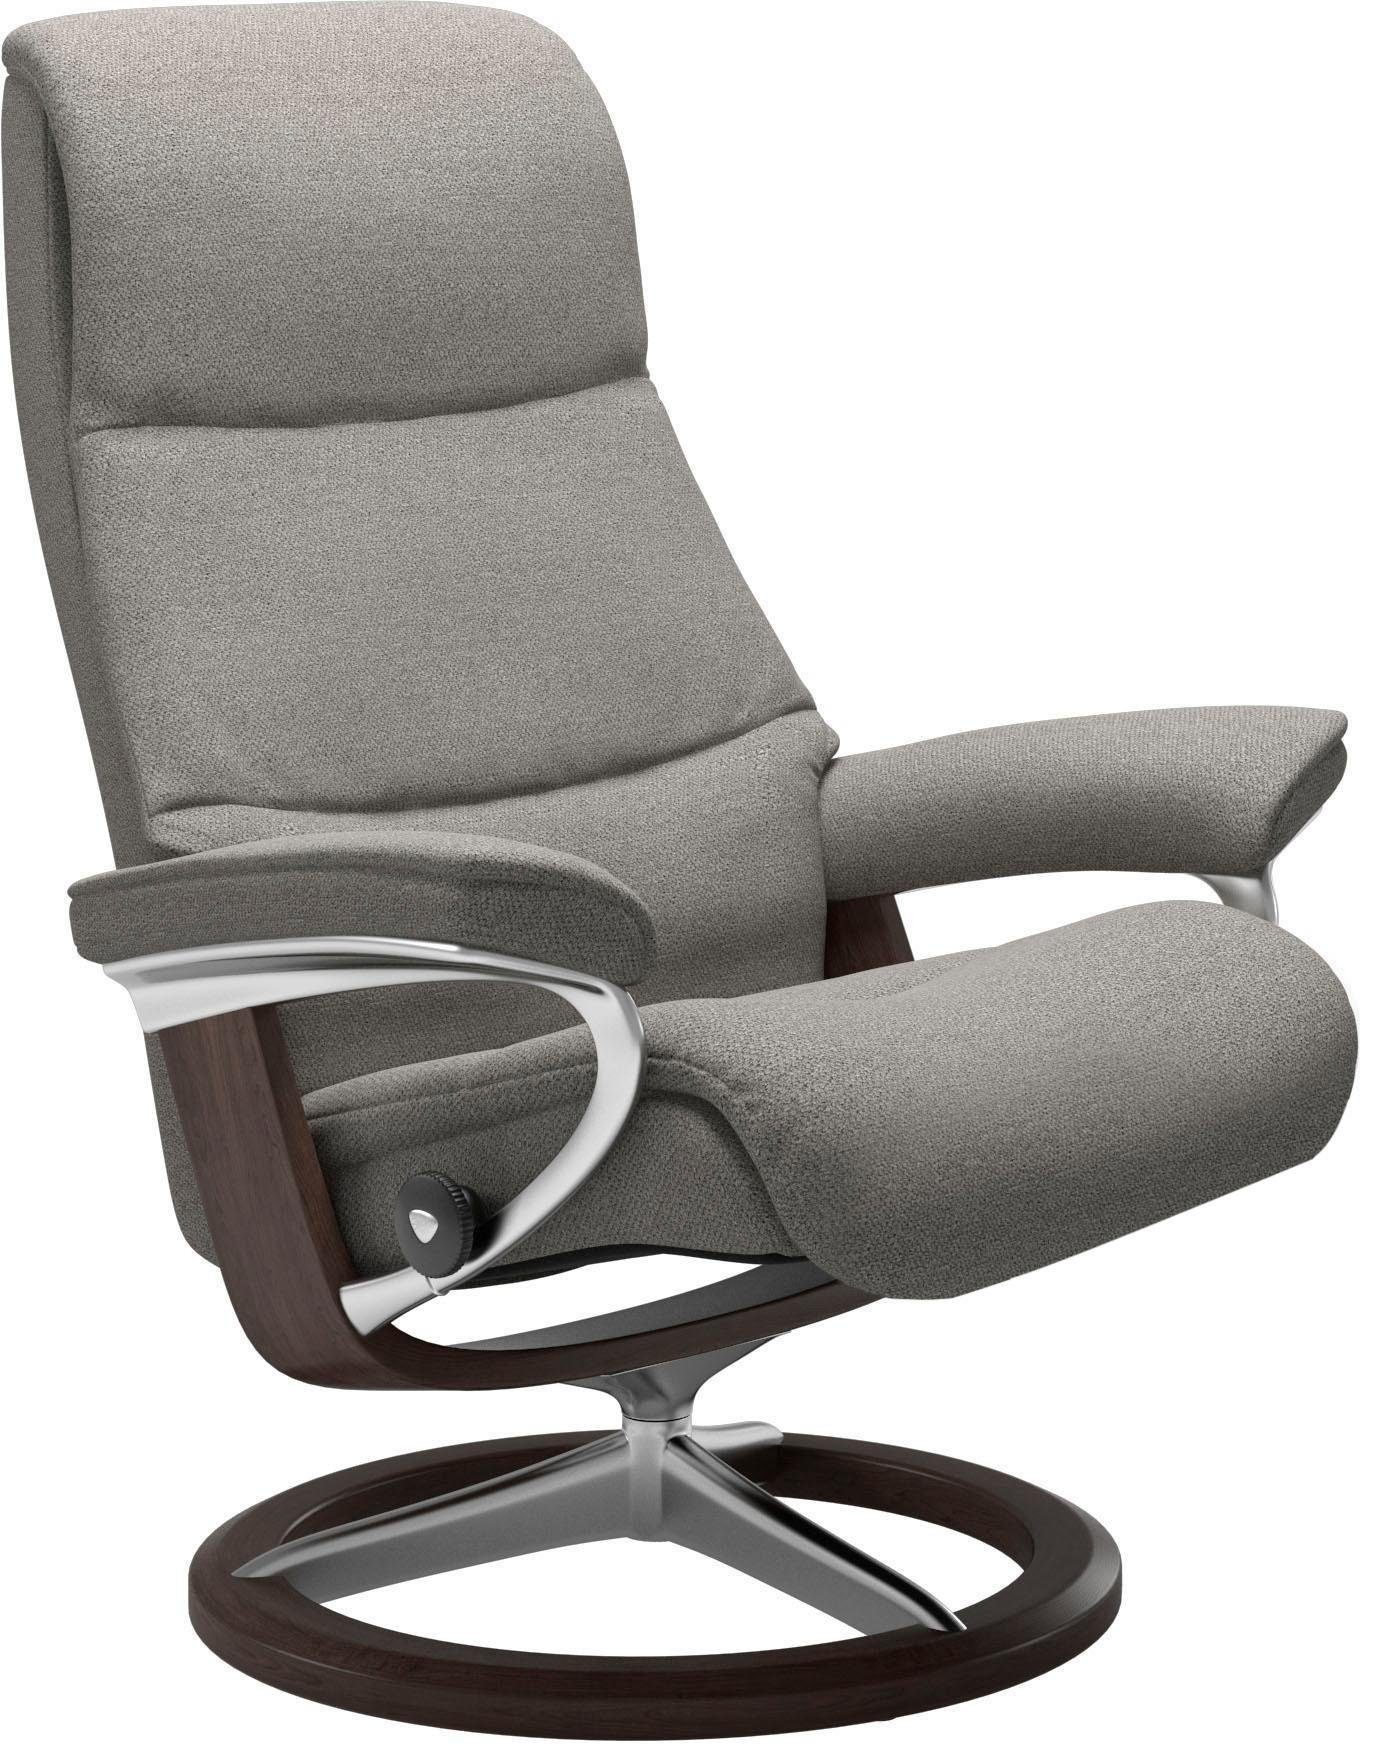 Stressless® Relaxsessel Wenge Größe Signature mit View, Base, S,Gestell